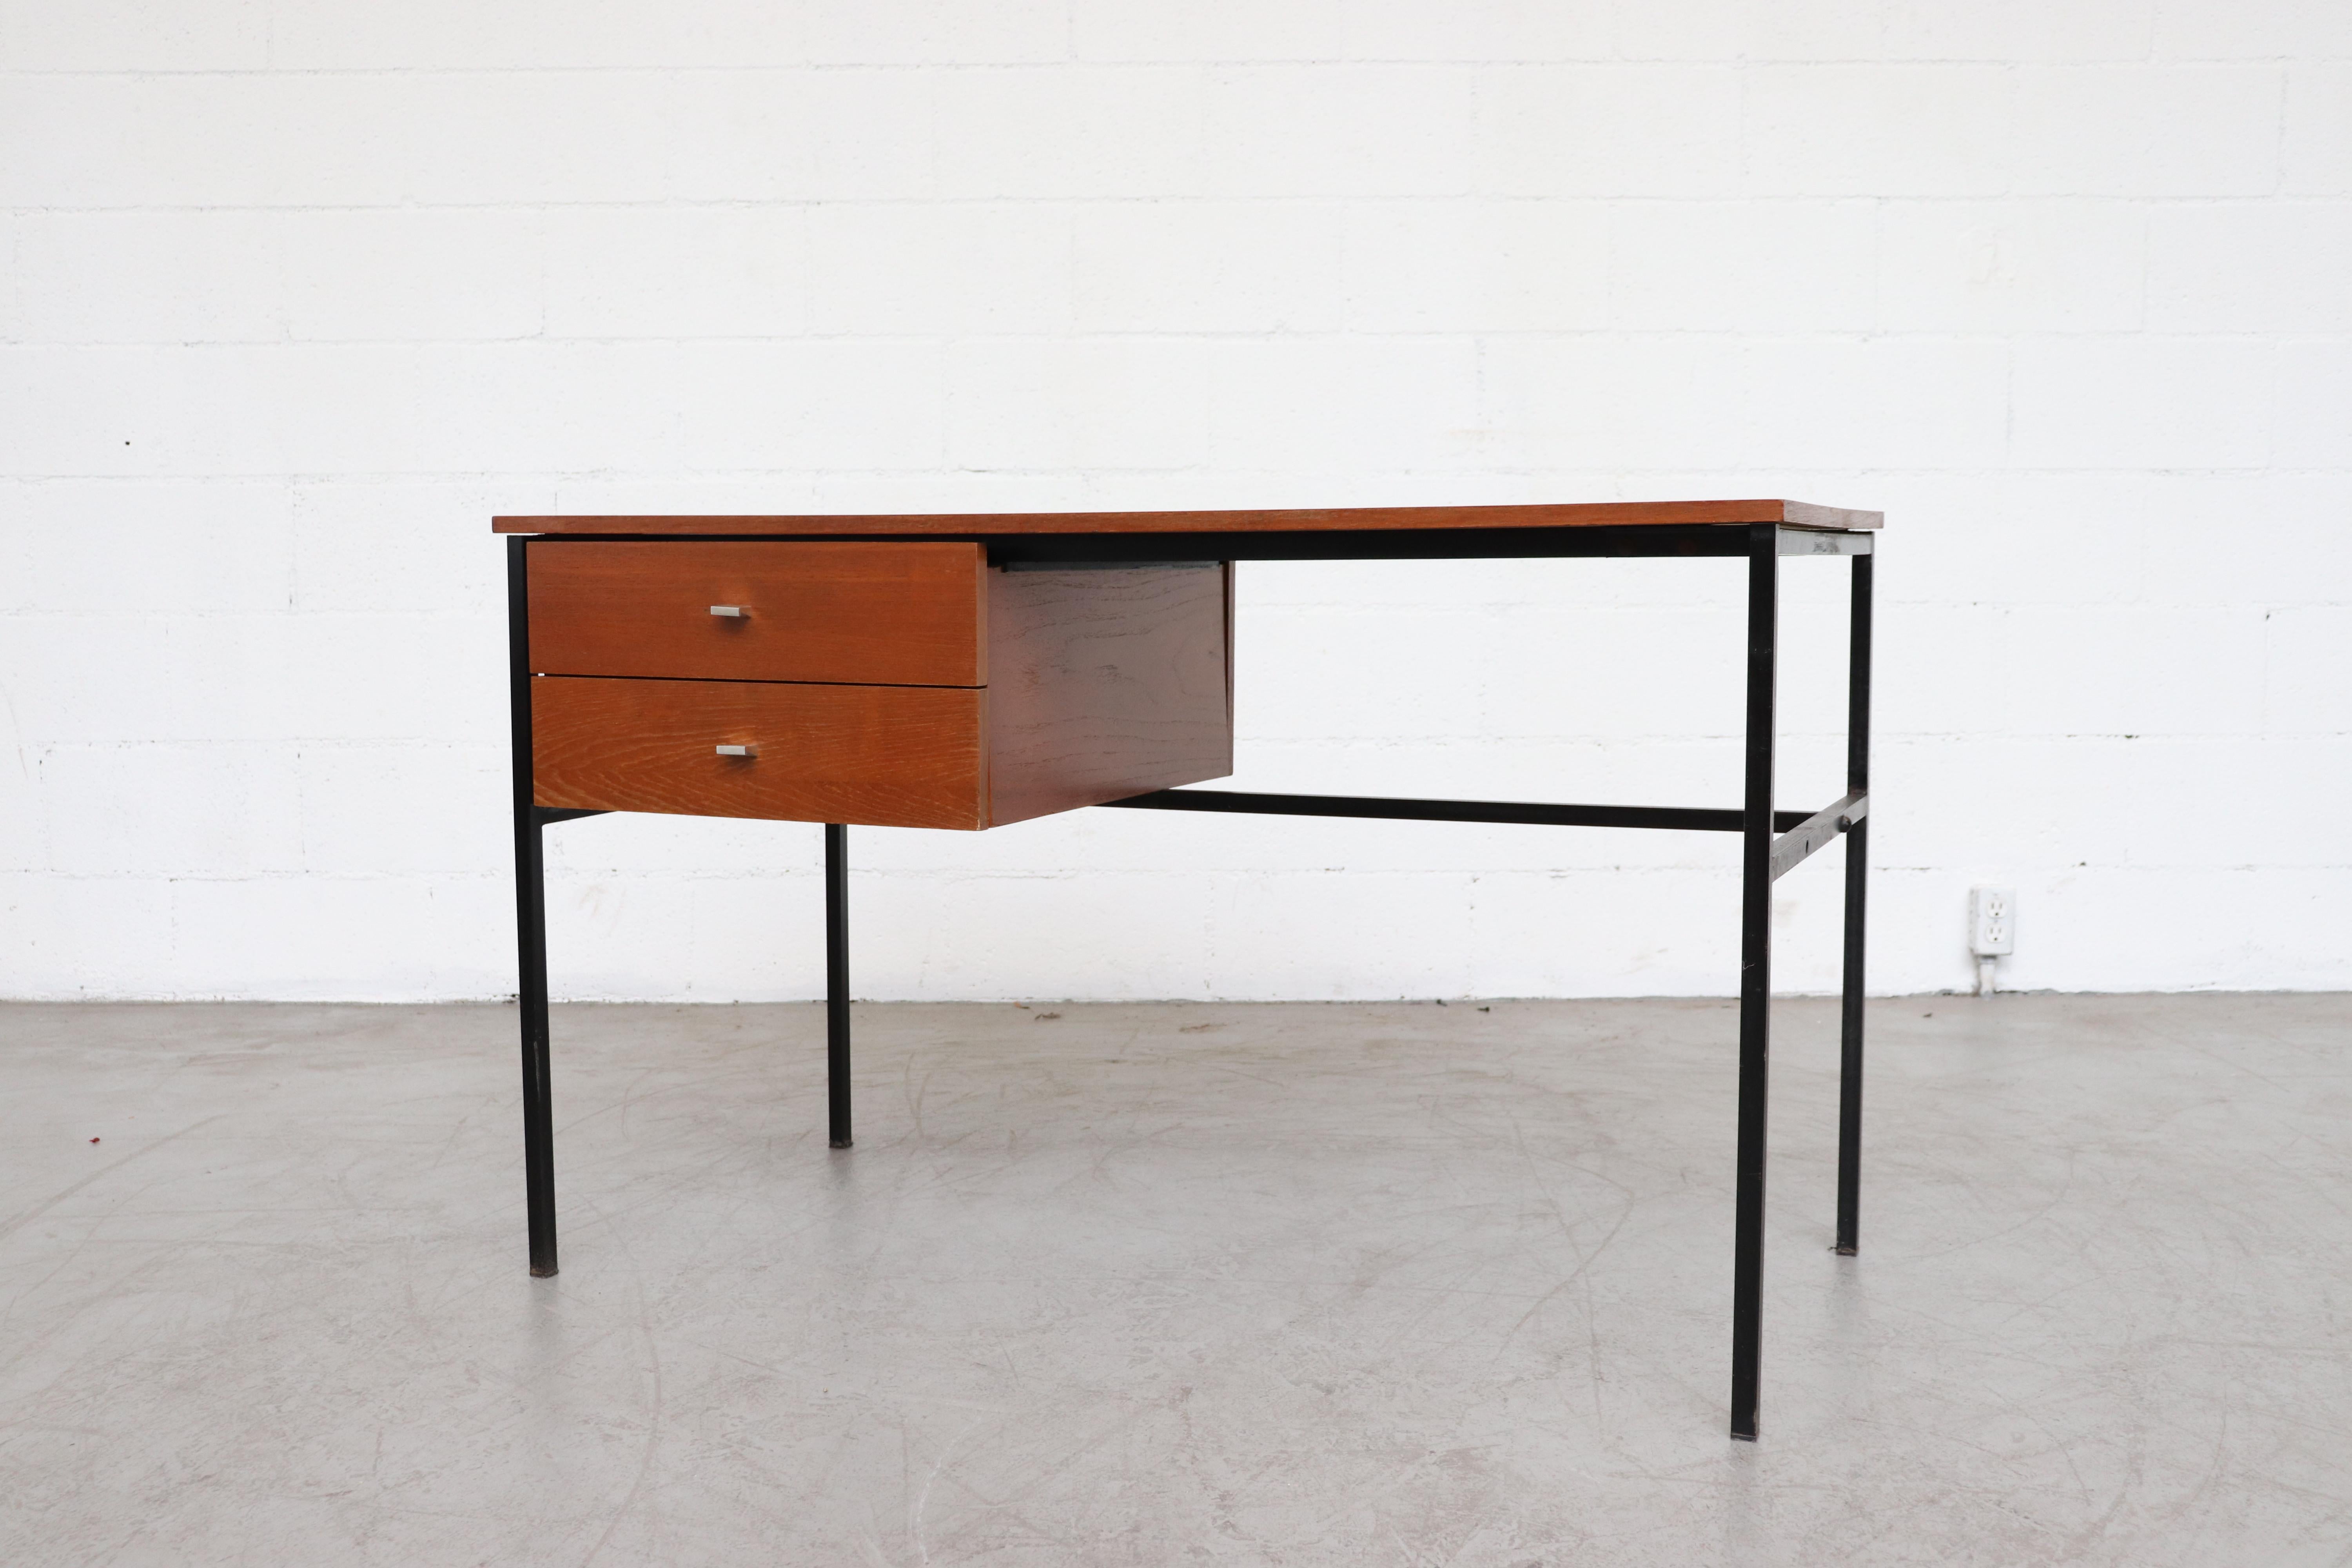 Pierre Guariche teak writing desk for Meurop with black metal frame and two drawers. Holes in frame are there to allow changing the drawer cabinet to the right side or left side. In original condition with some visual signs of wear consistent with